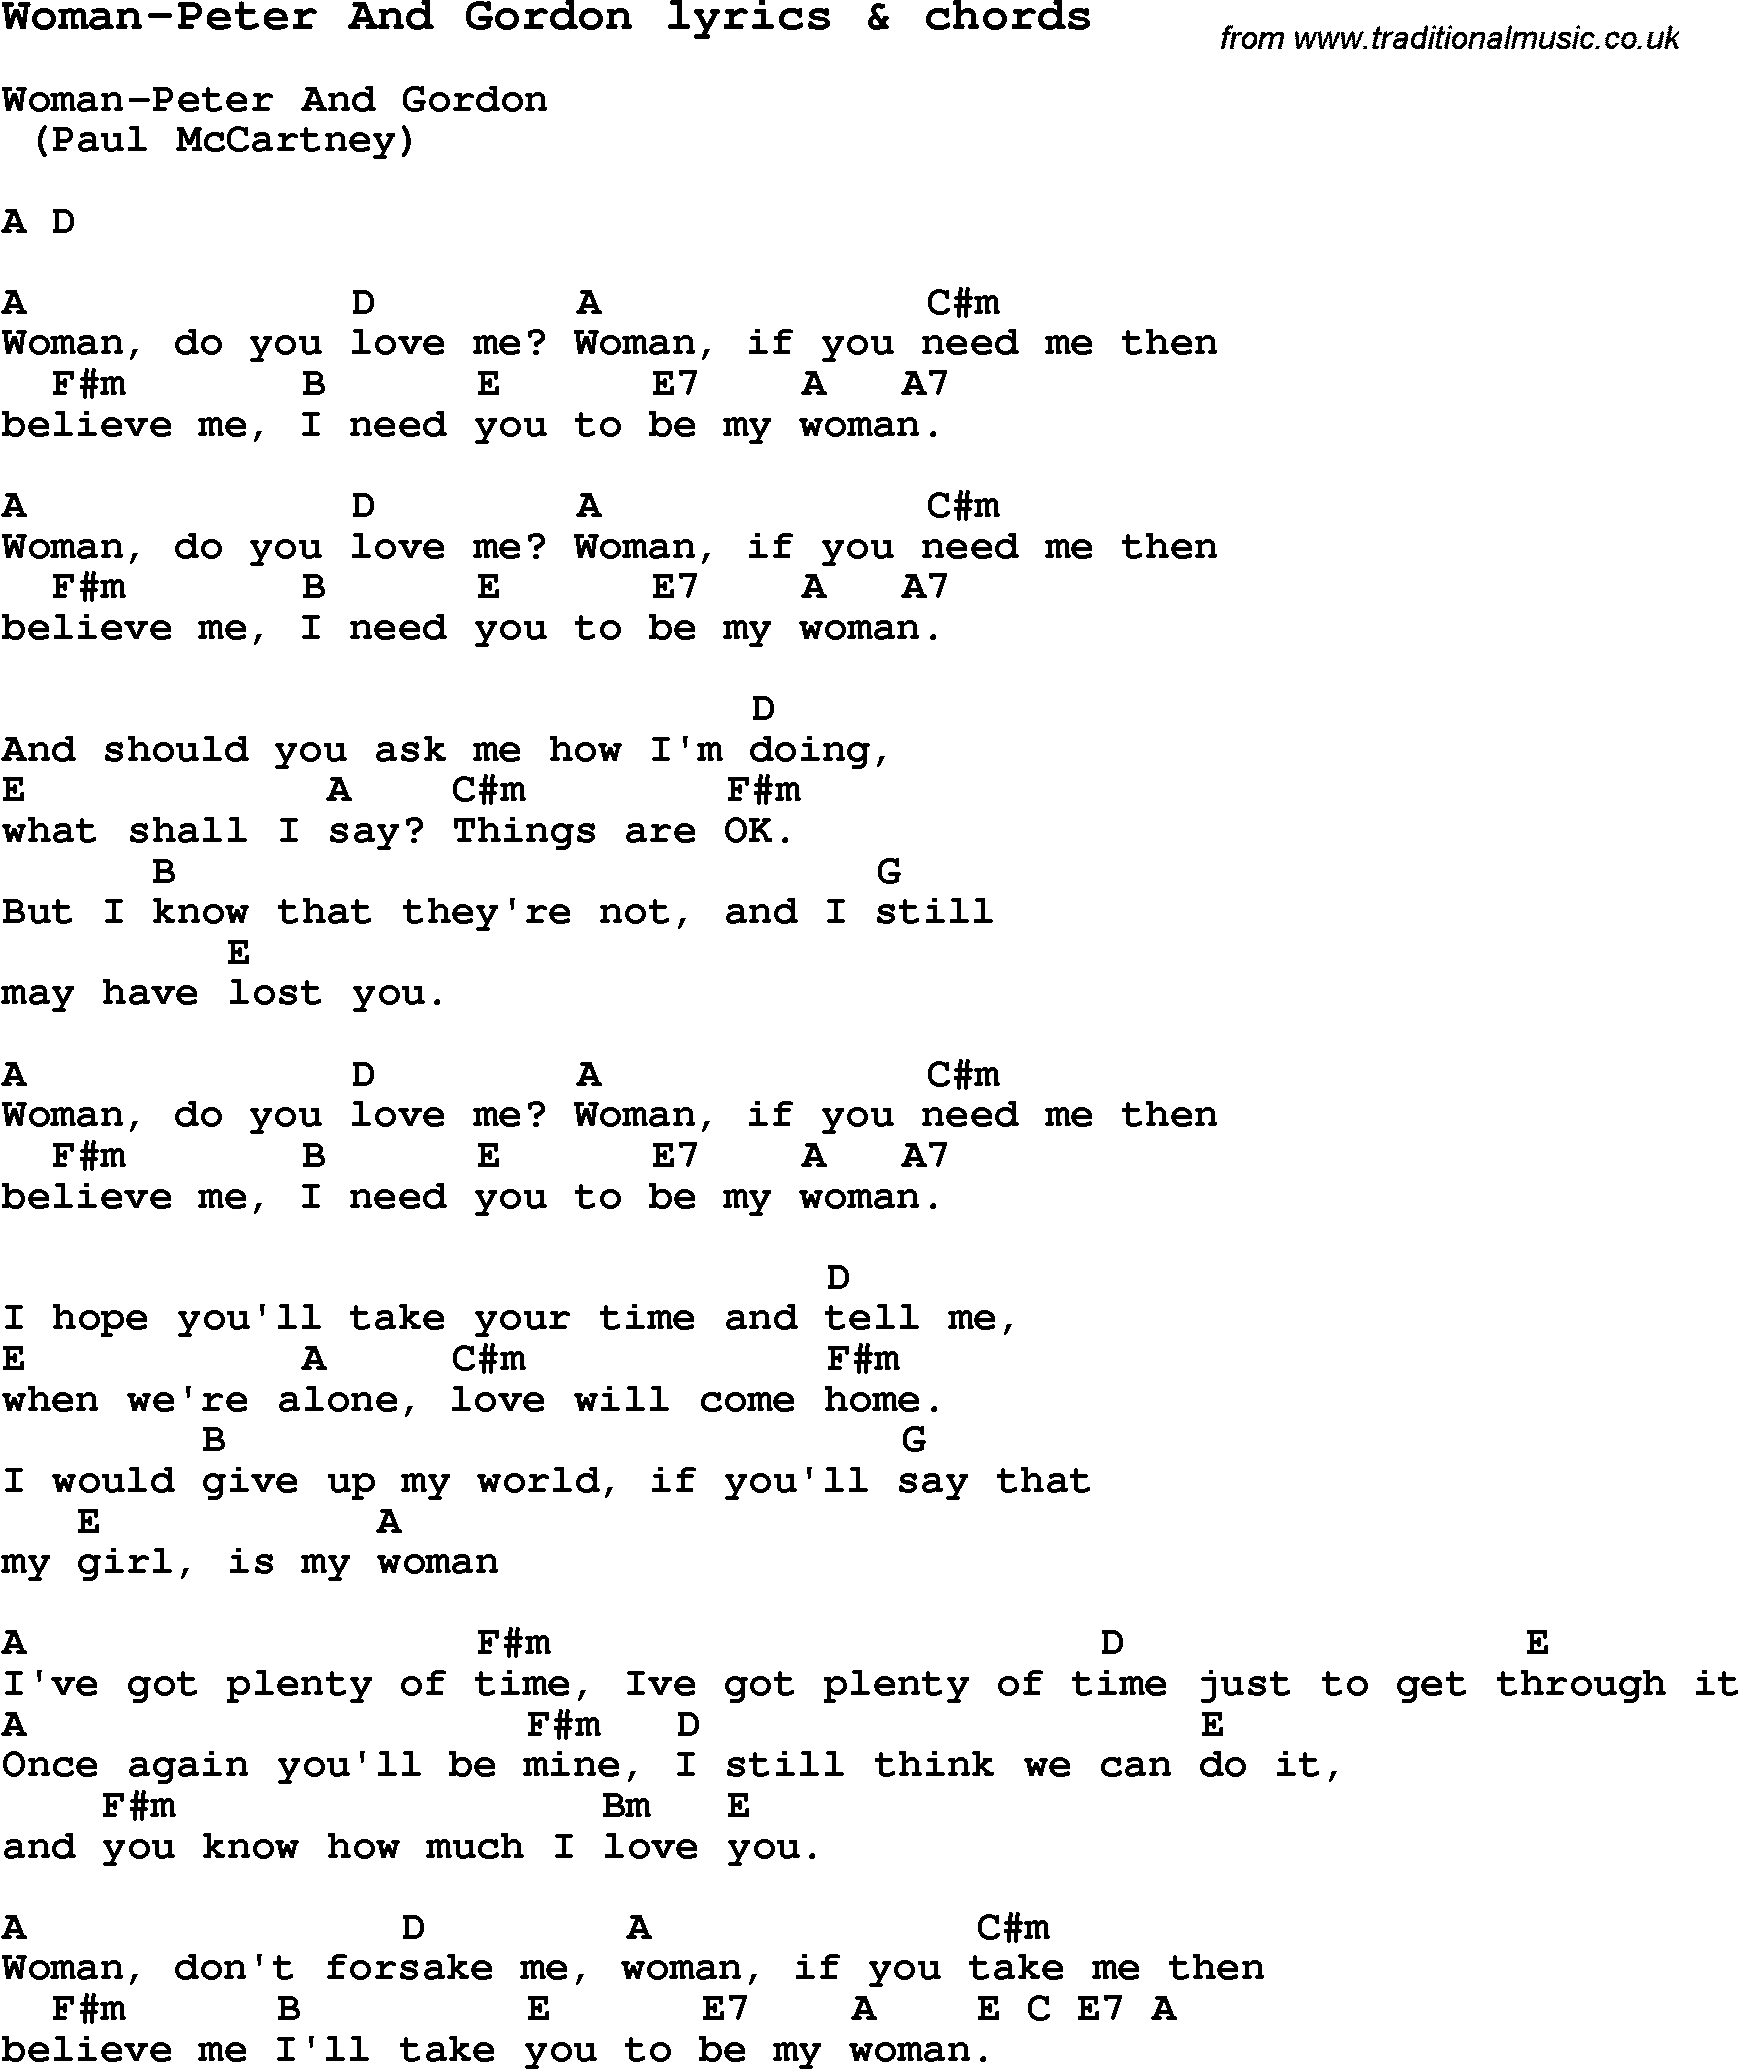 Love Song Lyrics for: Woman-Peter And Gordon with chords for Ukulele, Guitar Banjo etc.